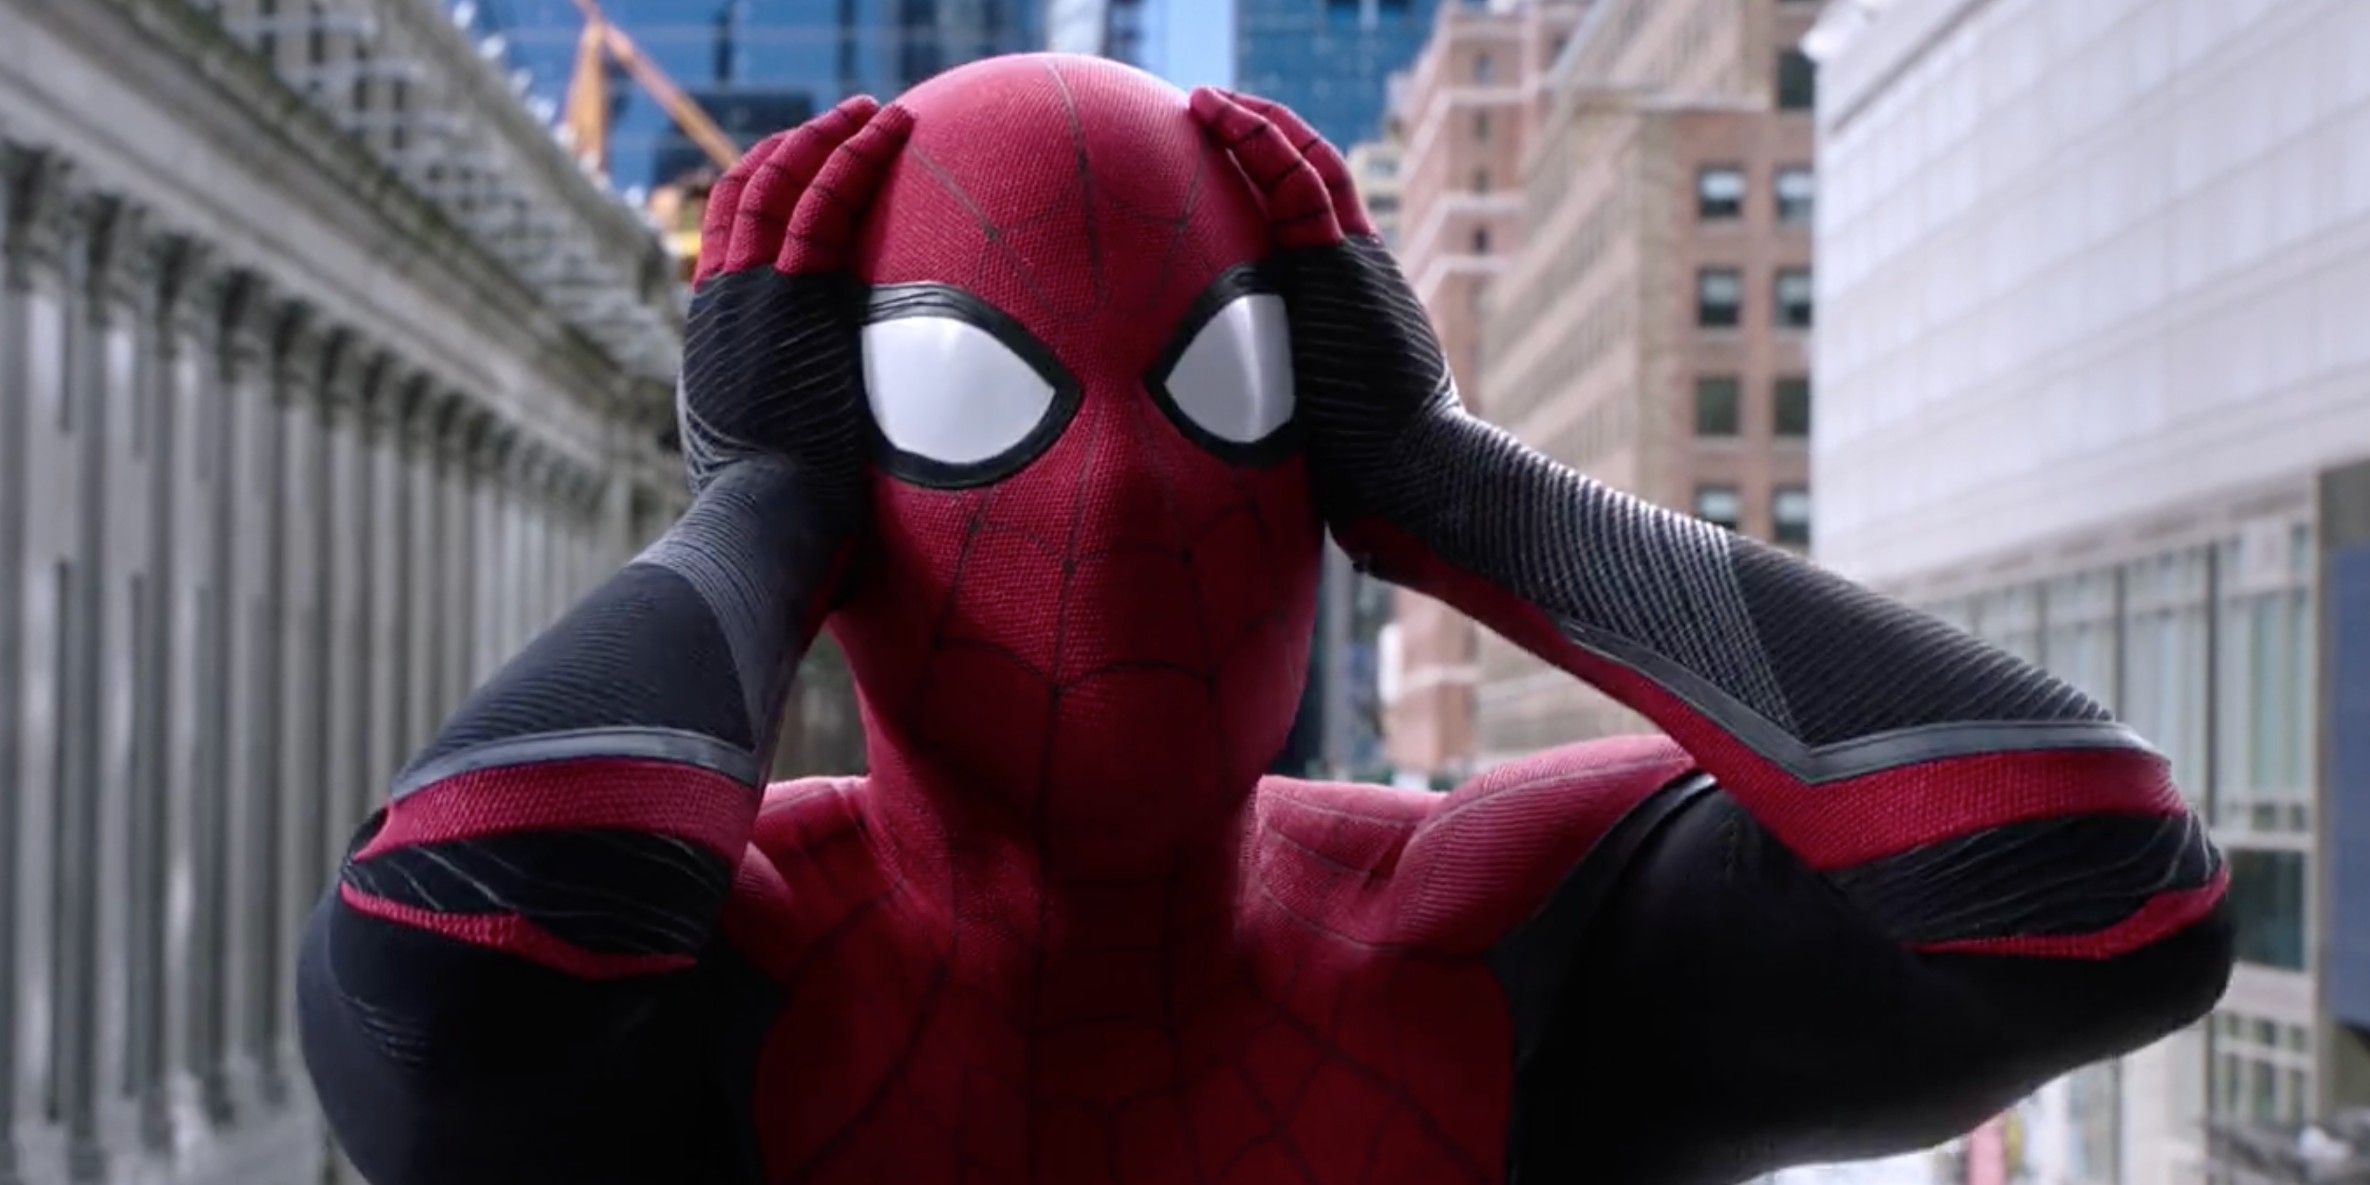 Spider-Man puts his hands on his head in Far From Home